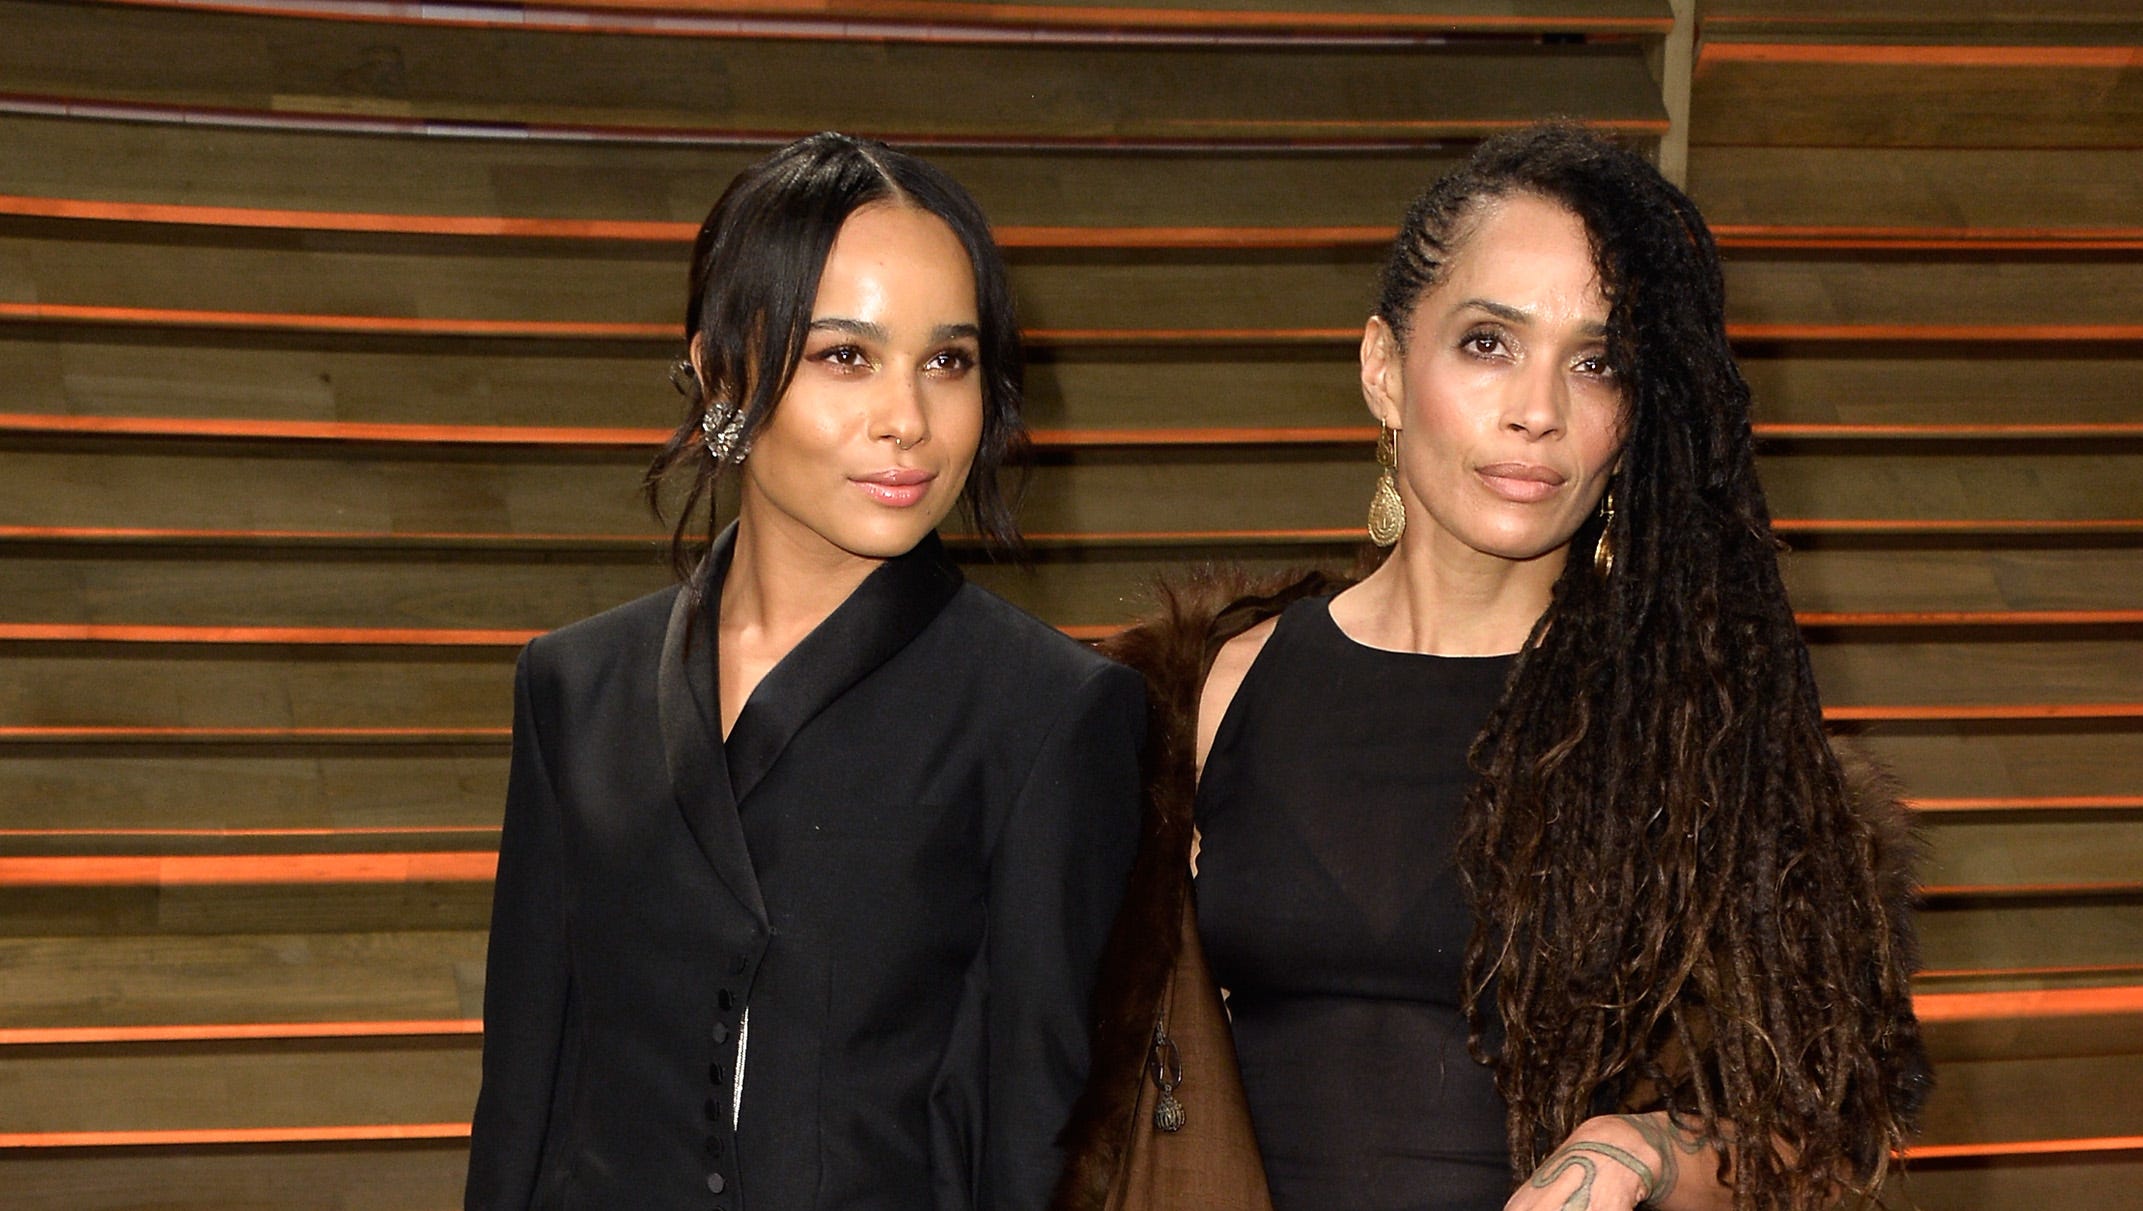 Bonet 'disgusted' by Cosby allegations, says daughter